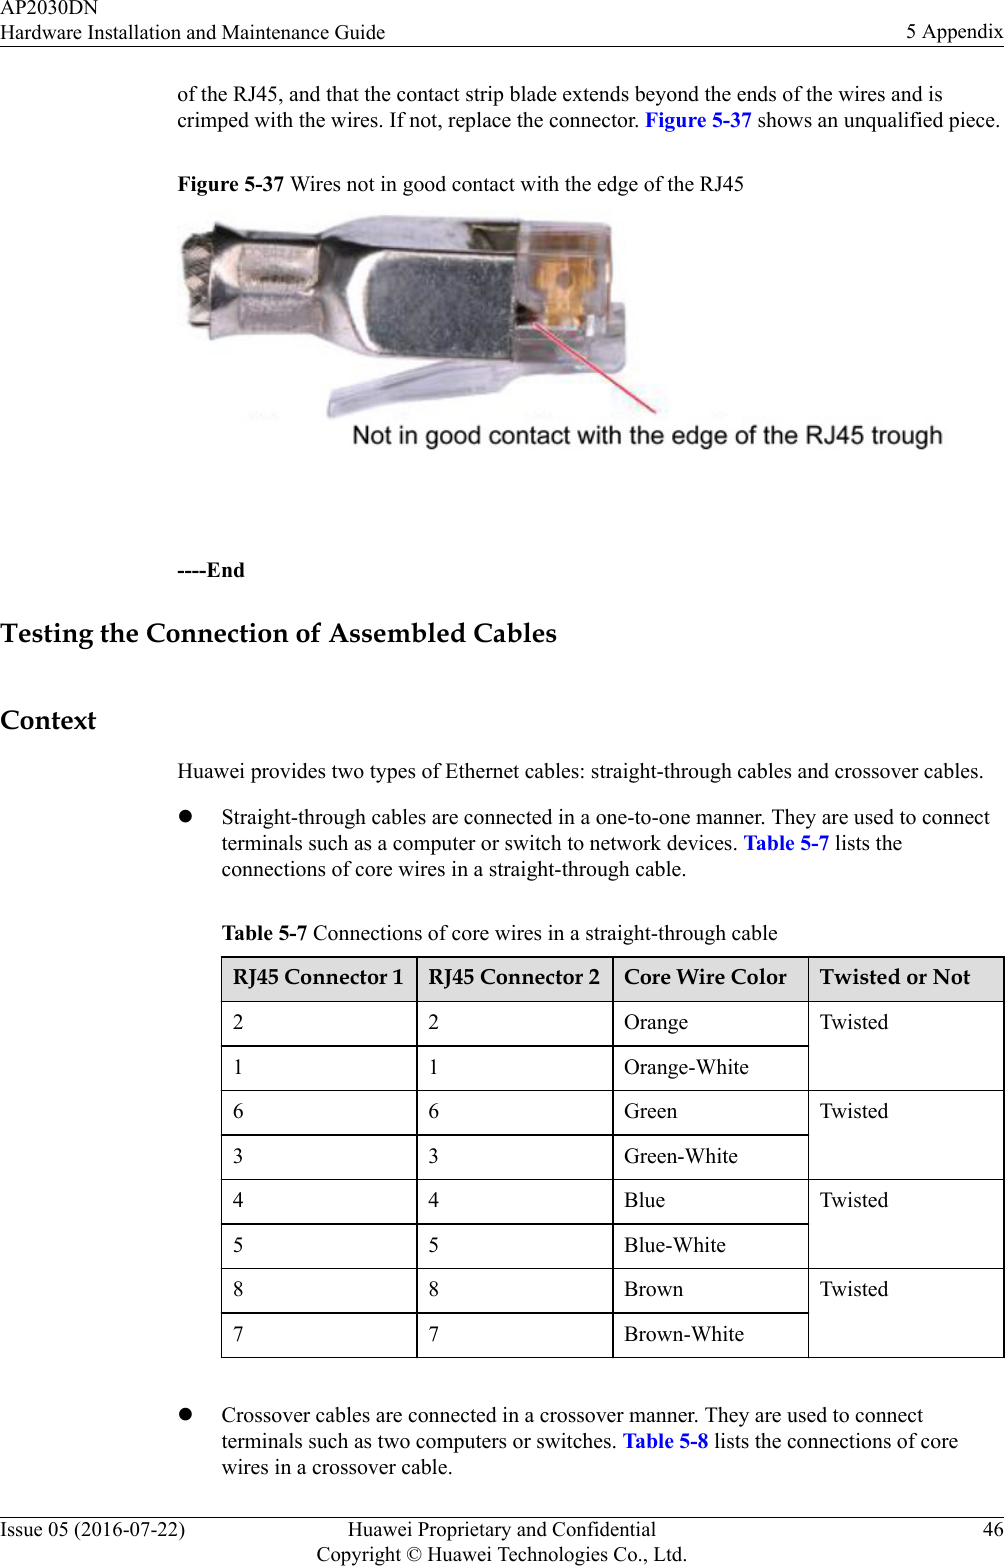 of the RJ45, and that the contact strip blade extends beyond the ends of the wires and iscrimped with the wires. If not, replace the connector. Figure 5-37 shows an unqualified piece.Figure 5-37 Wires not in good contact with the edge of the RJ45 ----EndTesting the Connection of Assembled CablesContextHuawei provides two types of Ethernet cables: straight-through cables and crossover cables.lStraight-through cables are connected in a one-to-one manner. They are used to connectterminals such as a computer or switch to network devices. Table 5-7 lists theconnections of core wires in a straight-through cable.Table 5-7 Connections of core wires in a straight-through cableRJ45 Connector 1 RJ45 Connector 2 Core Wire Color Twisted or Not2 2 Orange Twisted1 1 Orange-White6 6 Green Twisted3 3 Green-White4 4 Blue Twisted5 5 Blue-White8 8 Brown Twisted7 7 Brown-White lCrossover cables are connected in a crossover manner. They are used to connectterminals such as two computers or switches. Table 5-8 lists the connections of corewires in a crossover cable.AP2030DNHardware Installation and Maintenance Guide 5 AppendixIssue 05 (2016-07-22) Huawei Proprietary and ConfidentialCopyright © Huawei Technologies Co., Ltd.46